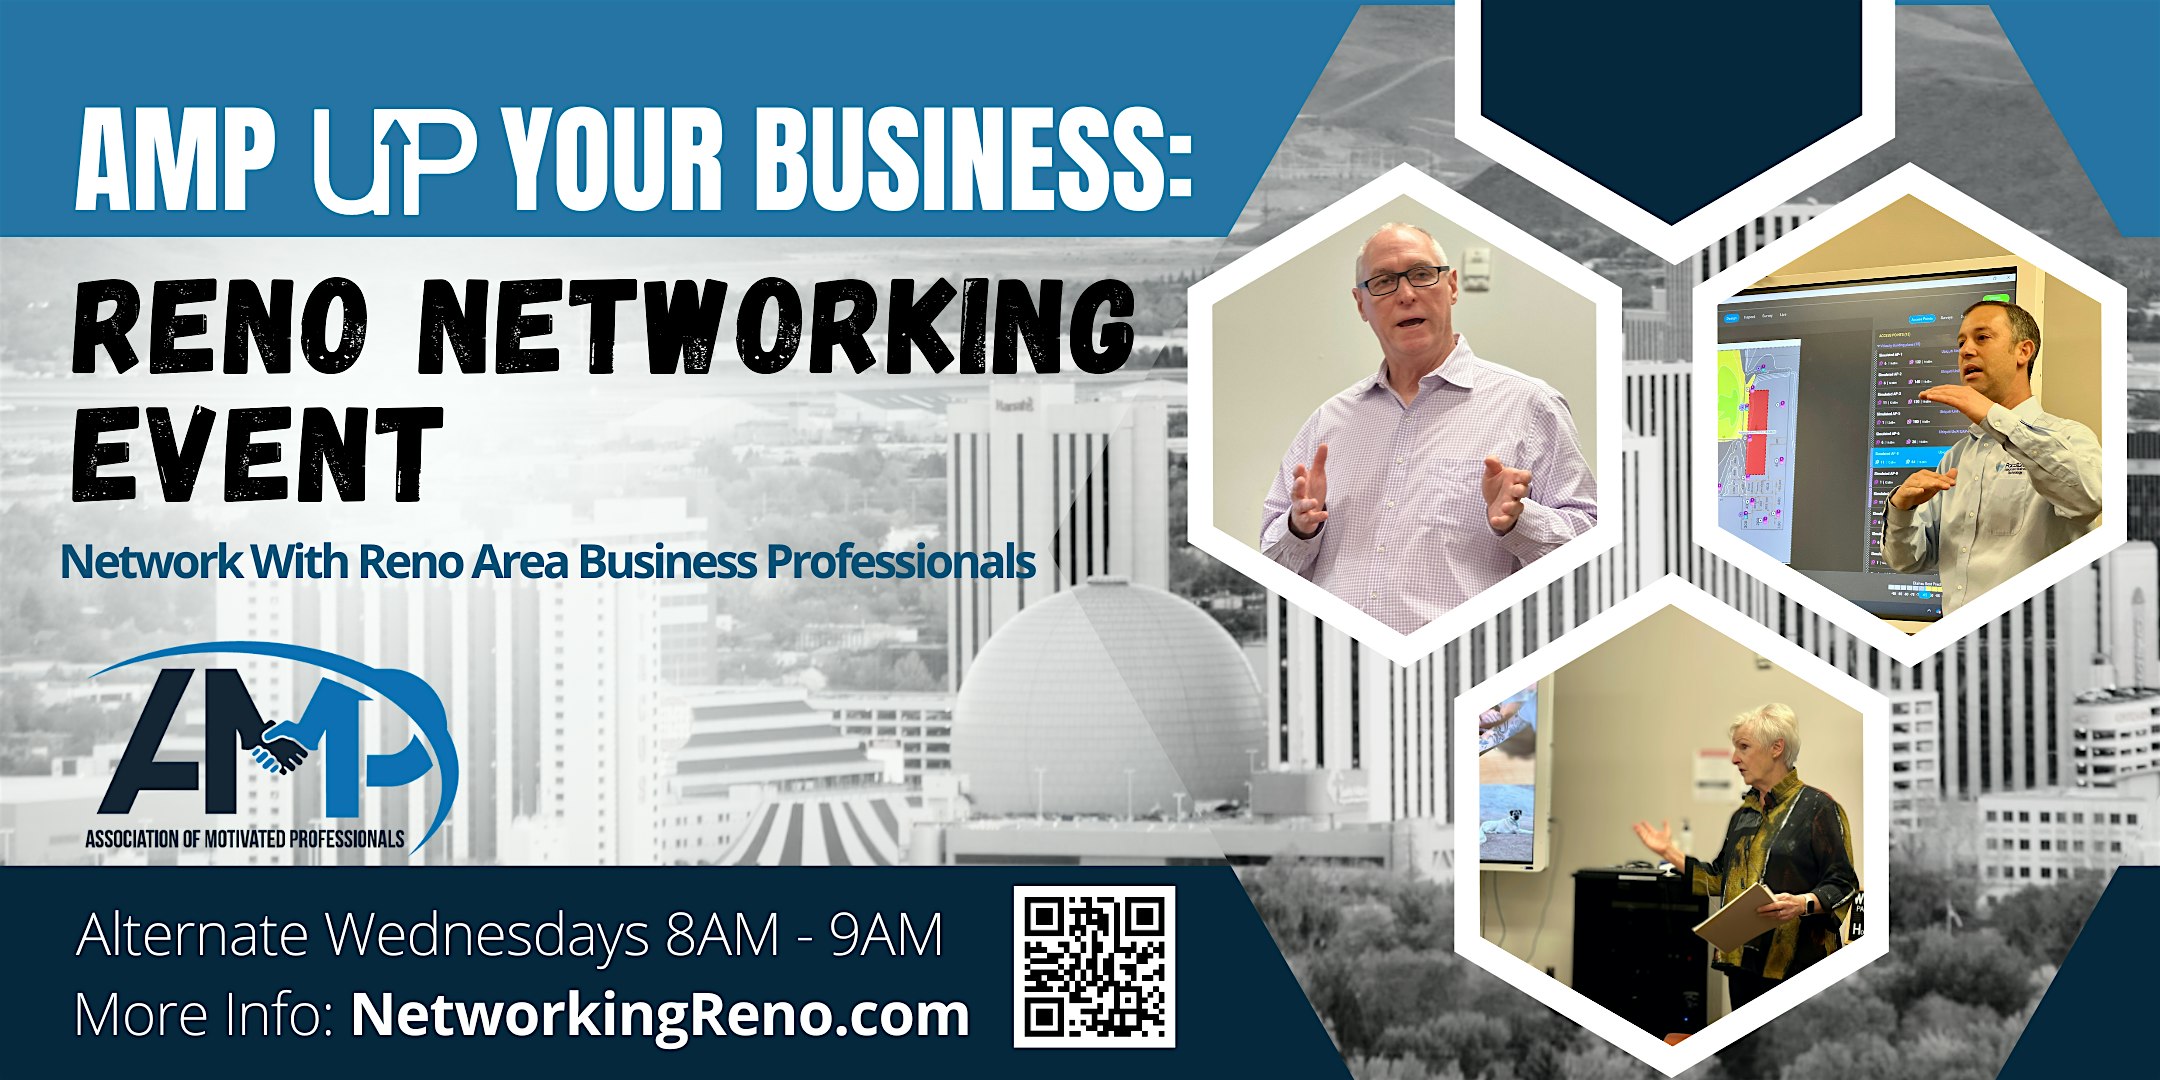 AMP Up Your Business: Reno Networking Event-Guest Speaker:  Nancy Lane